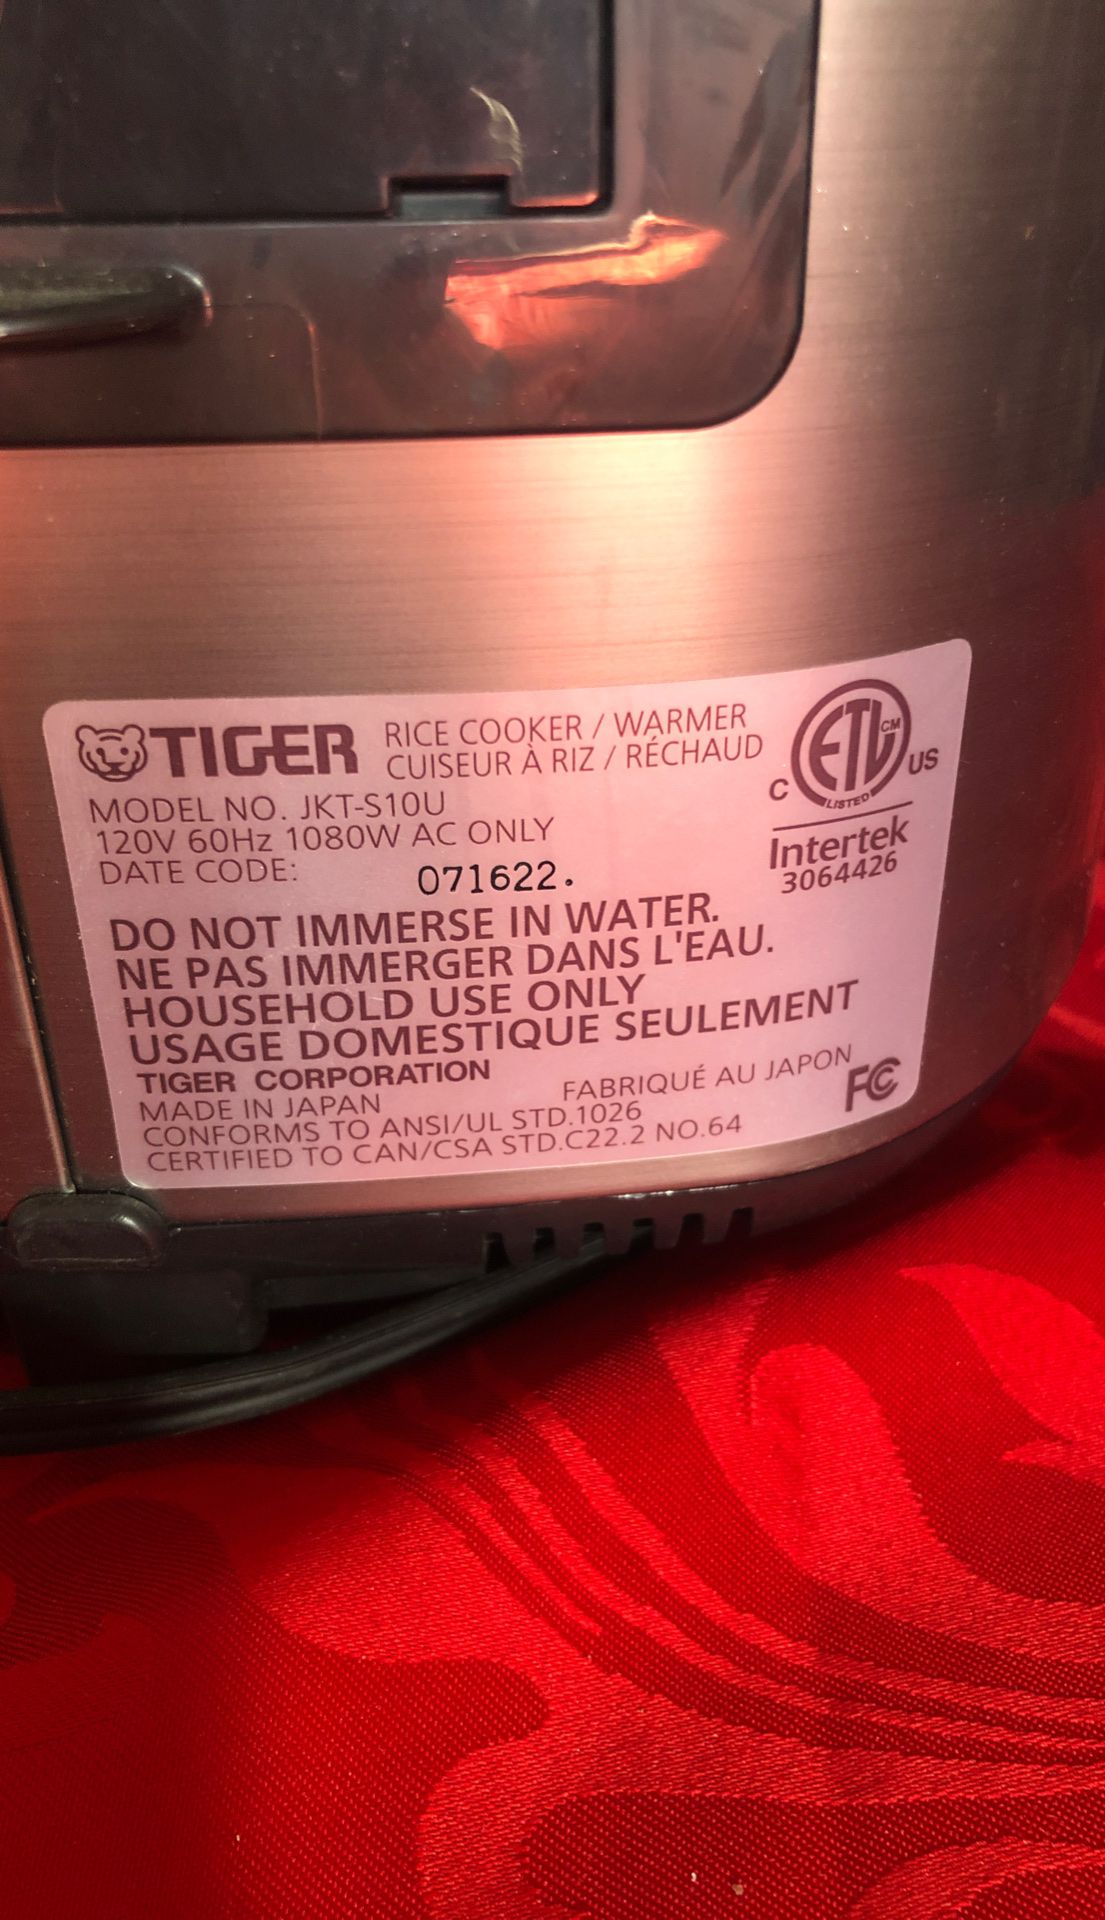 NEW TIGER RICE COOKER AND WARMER 8 CUP(UNCOOK), Urban Satin JNP-S15U-HU for  Sale in Las Vegas, NV - OfferUp